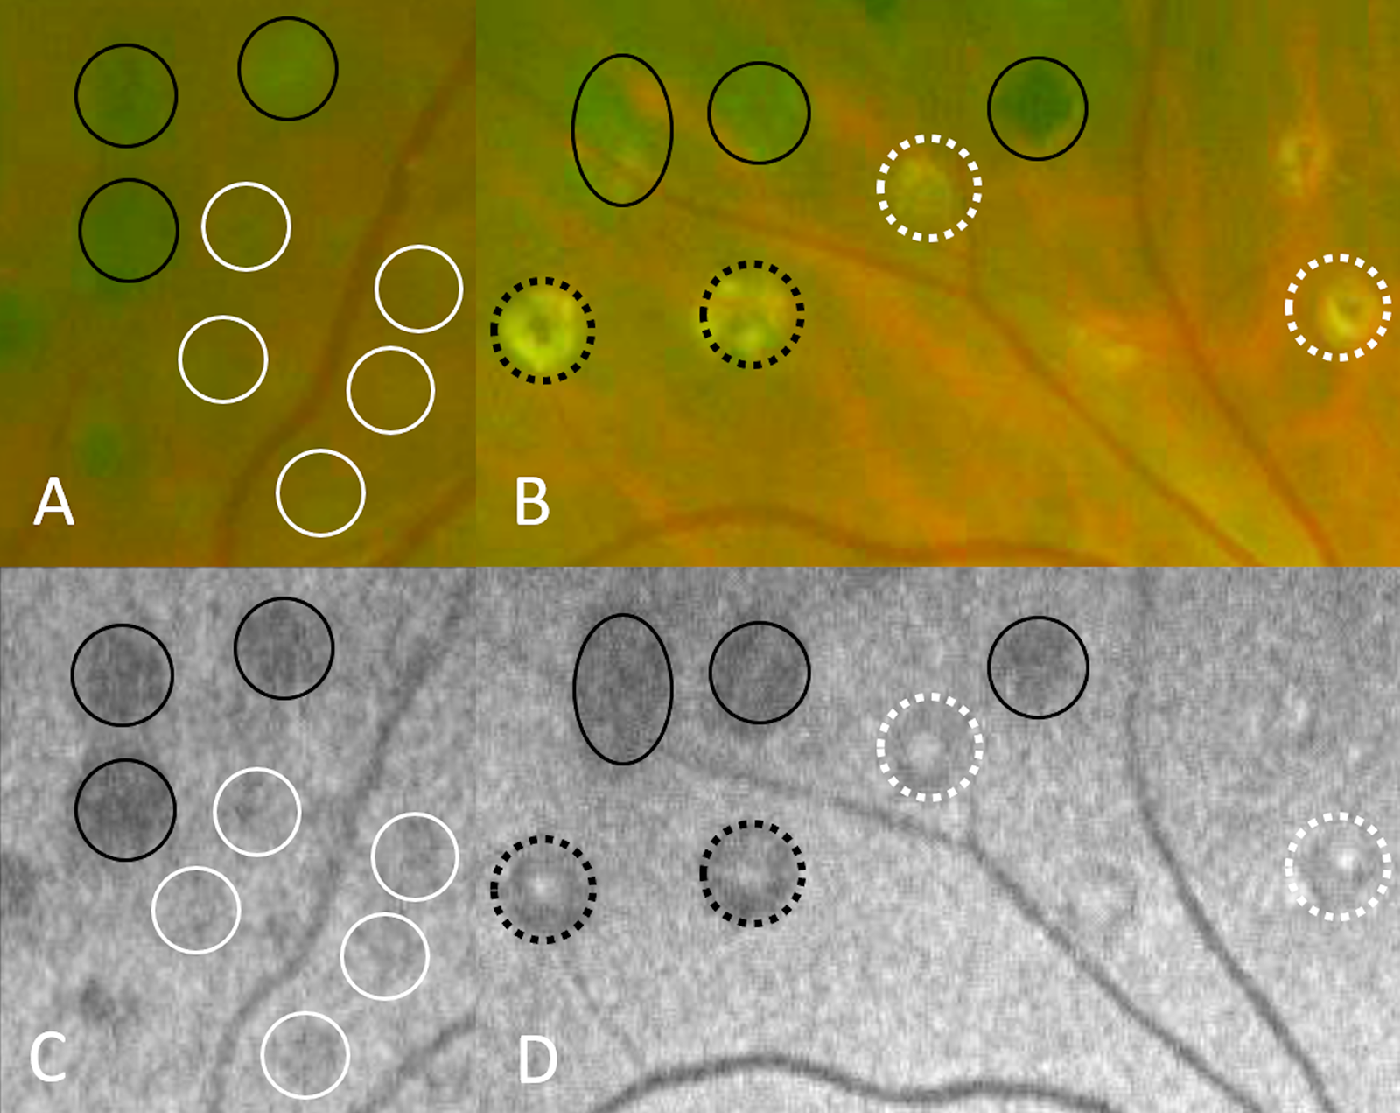 This image from the study shows areas of photocoagulation on fundus photography (A, B) and autofluorescence (C, D). The researchers correlated these areas with microperimetry results and demonstrated some preservation of photoreceptor function. (Black circle: no FAF signal; white circle: lesions with diffuse FAF; white-dotted circle: lesions with white-dotted centers and diffuse FAF in the background; black-dotted circle: lesions with white-dotted centers and no background FAF.)